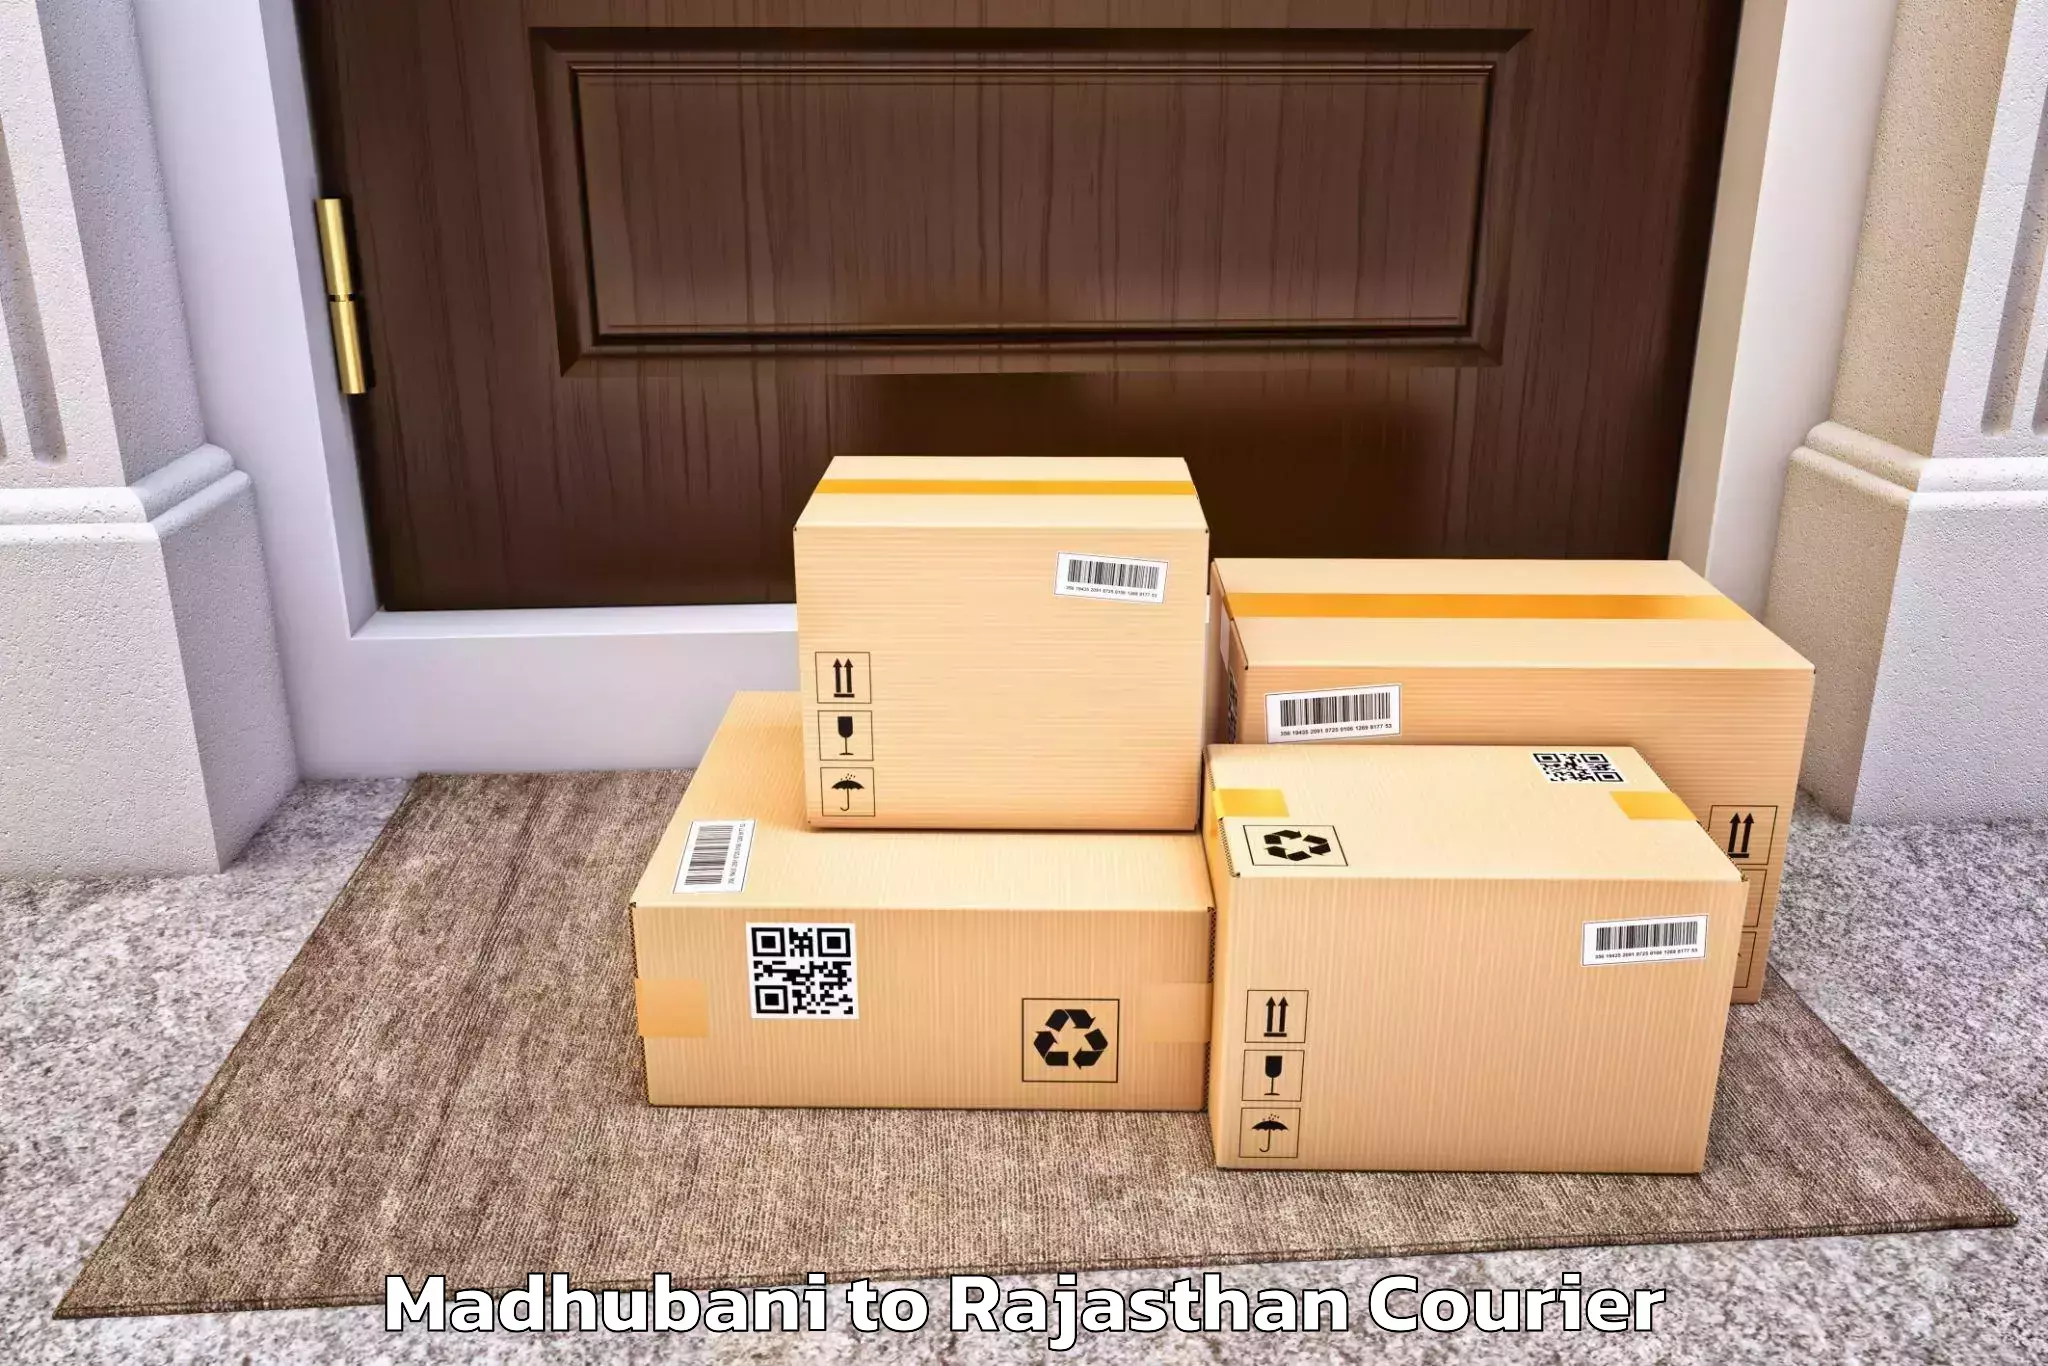 Moving and storage services Madhubani to Behror